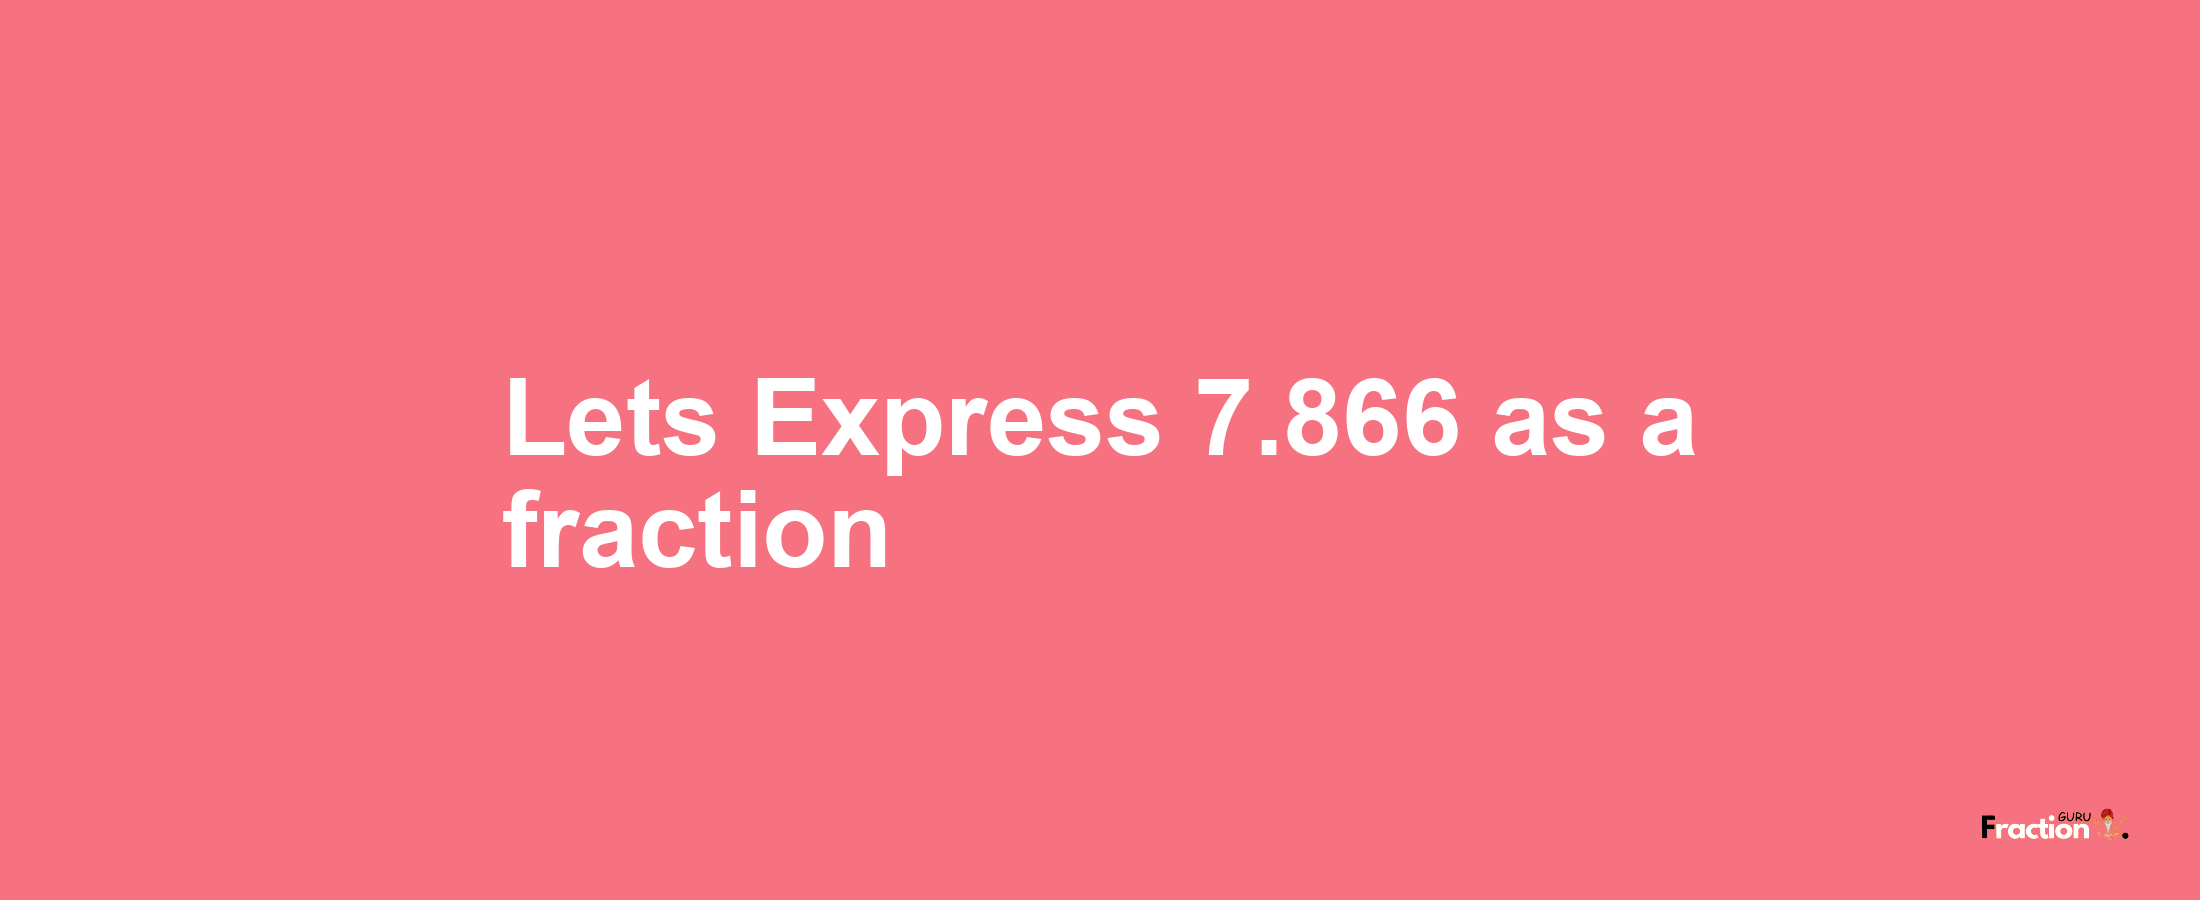 Lets Express 7.866 as afraction